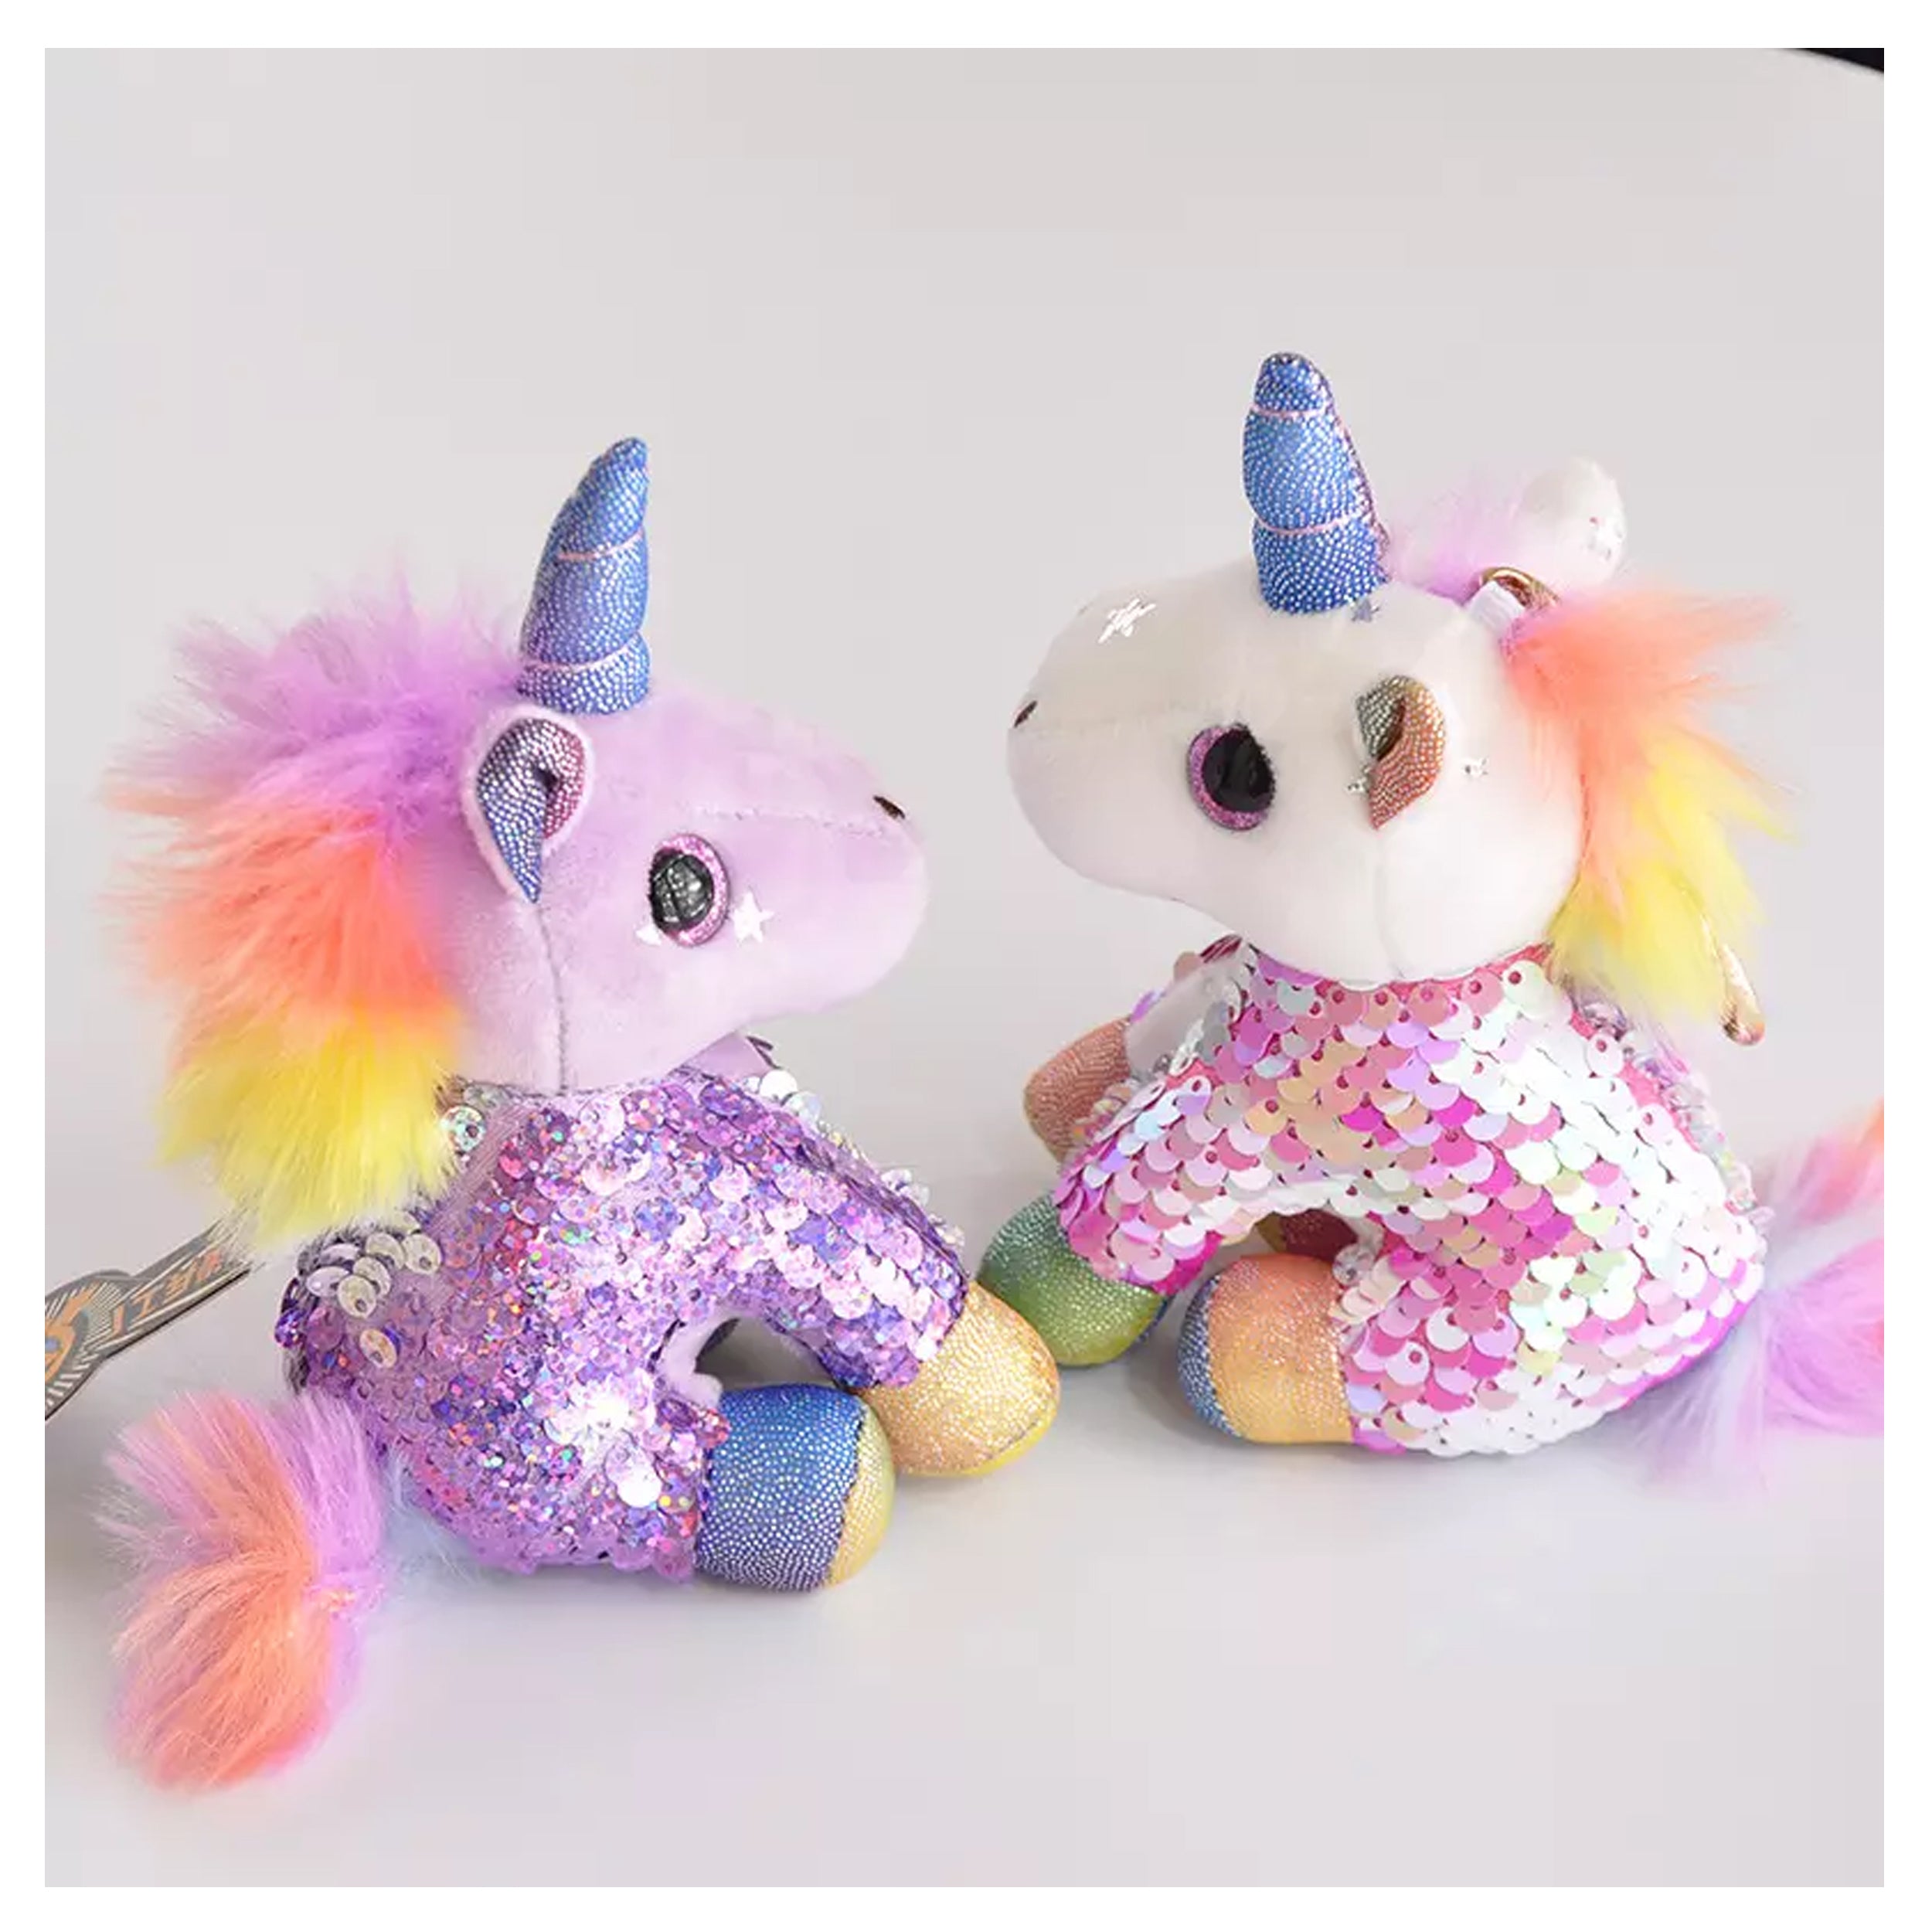 New Sequins Unicorn Key Chain Plush Toy - Assorted Colors and Designs for the Perfect Accessory